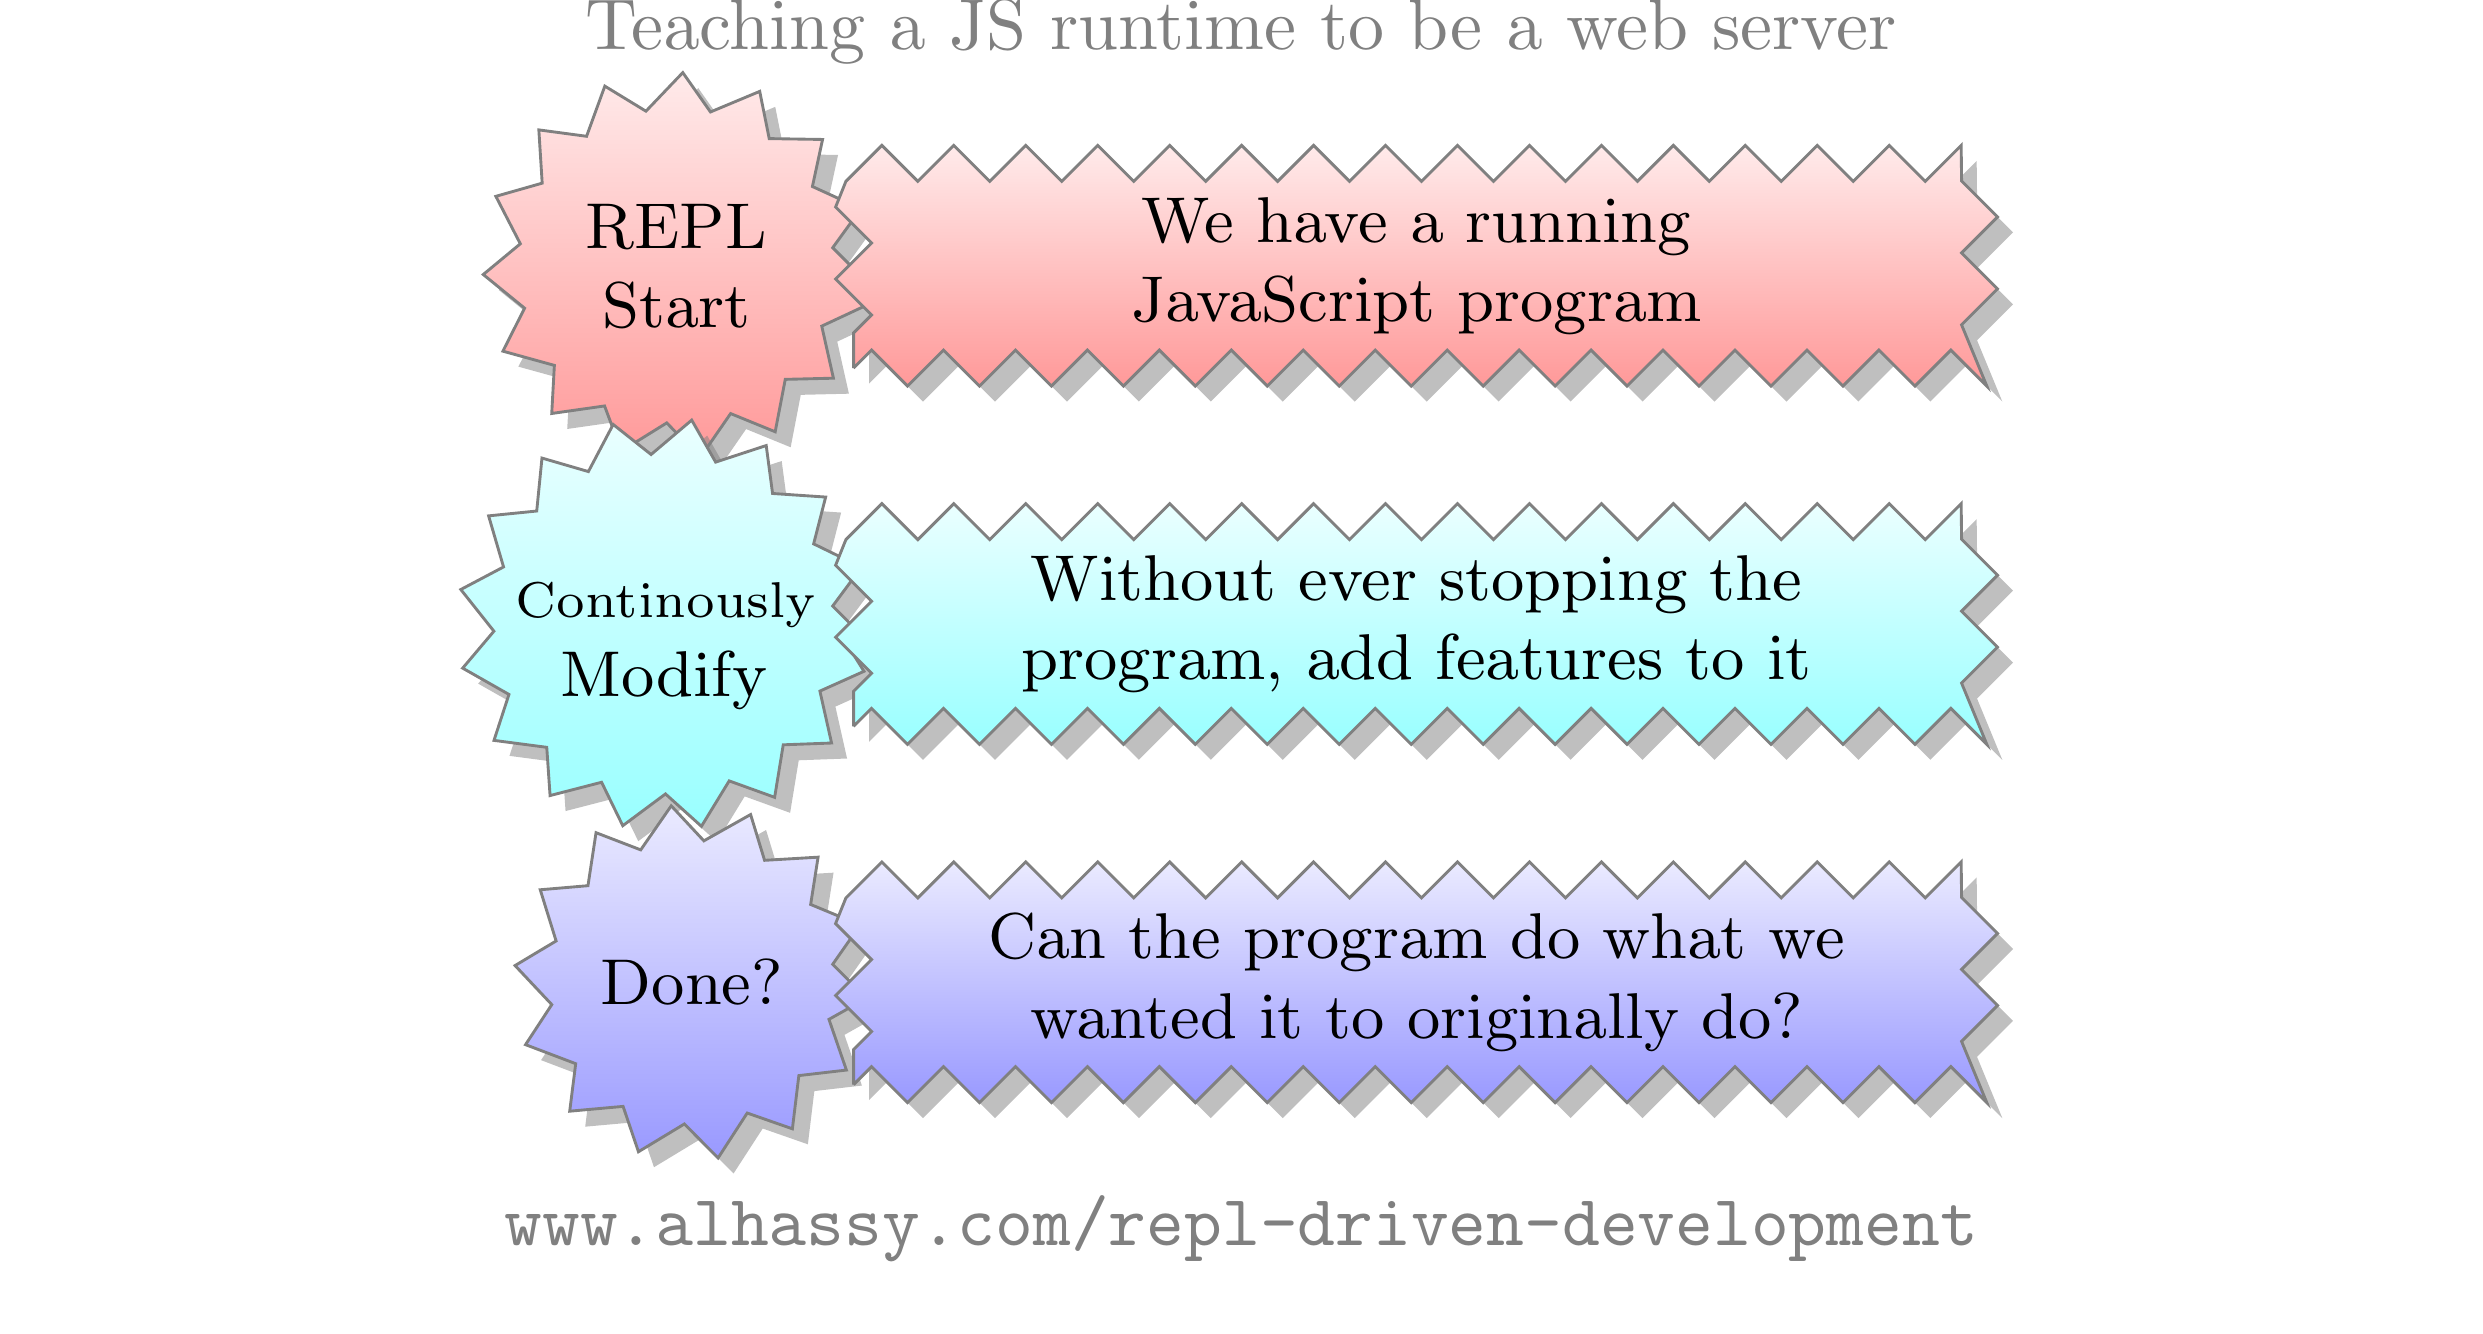 rdd-teaching-a-js-runtime-to-be-a-webserver.png